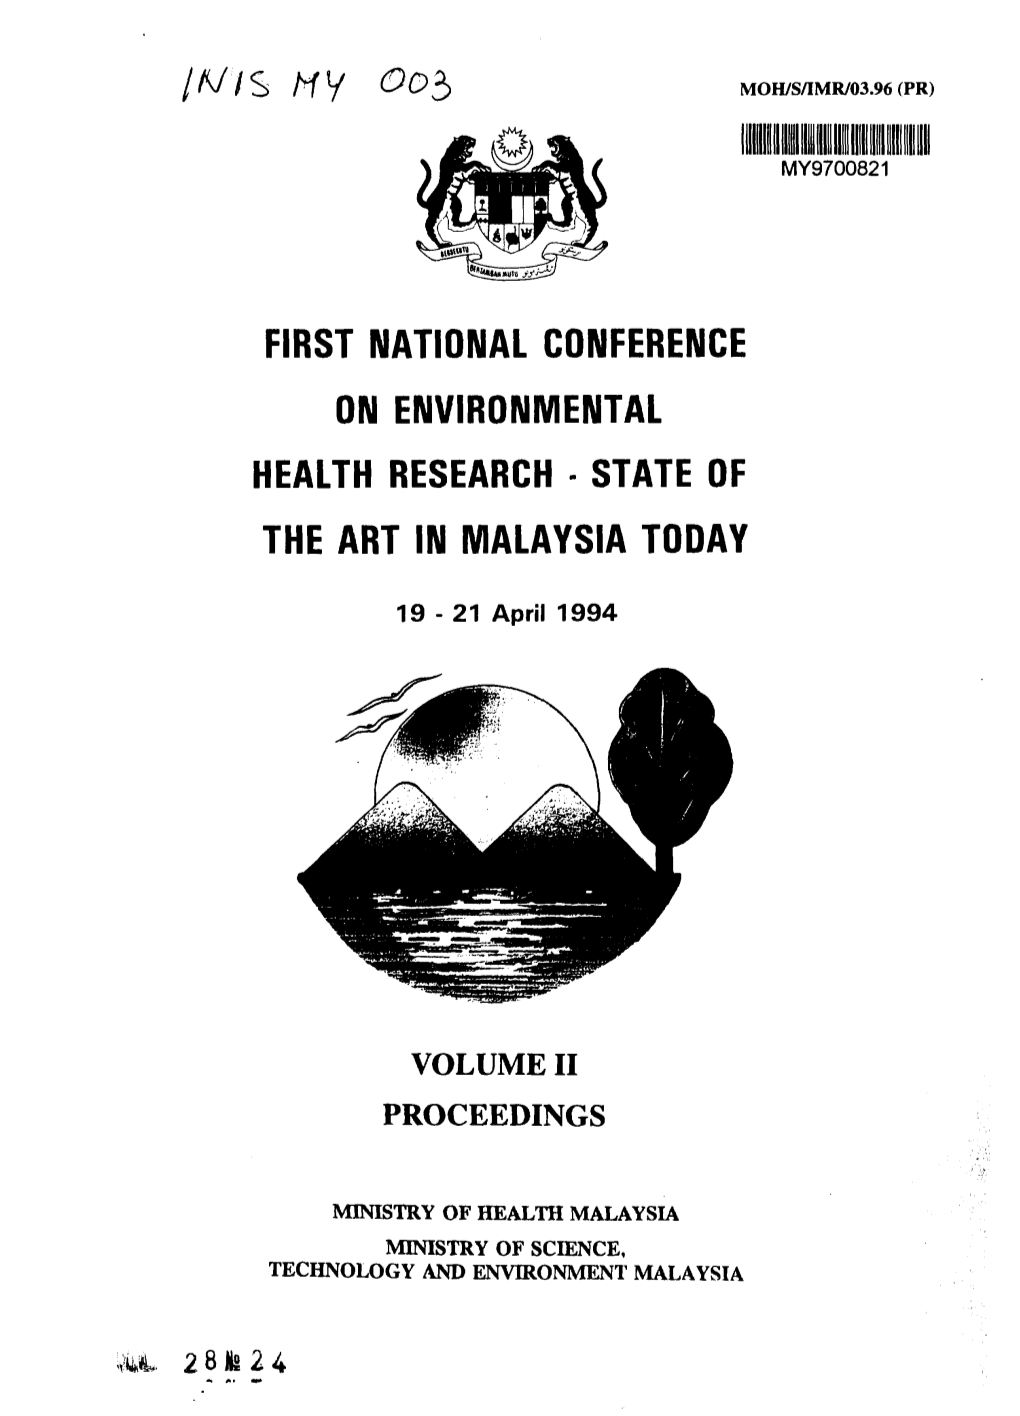 First National Conference on Environmental Health Research - State of the Art in Malaysia Today